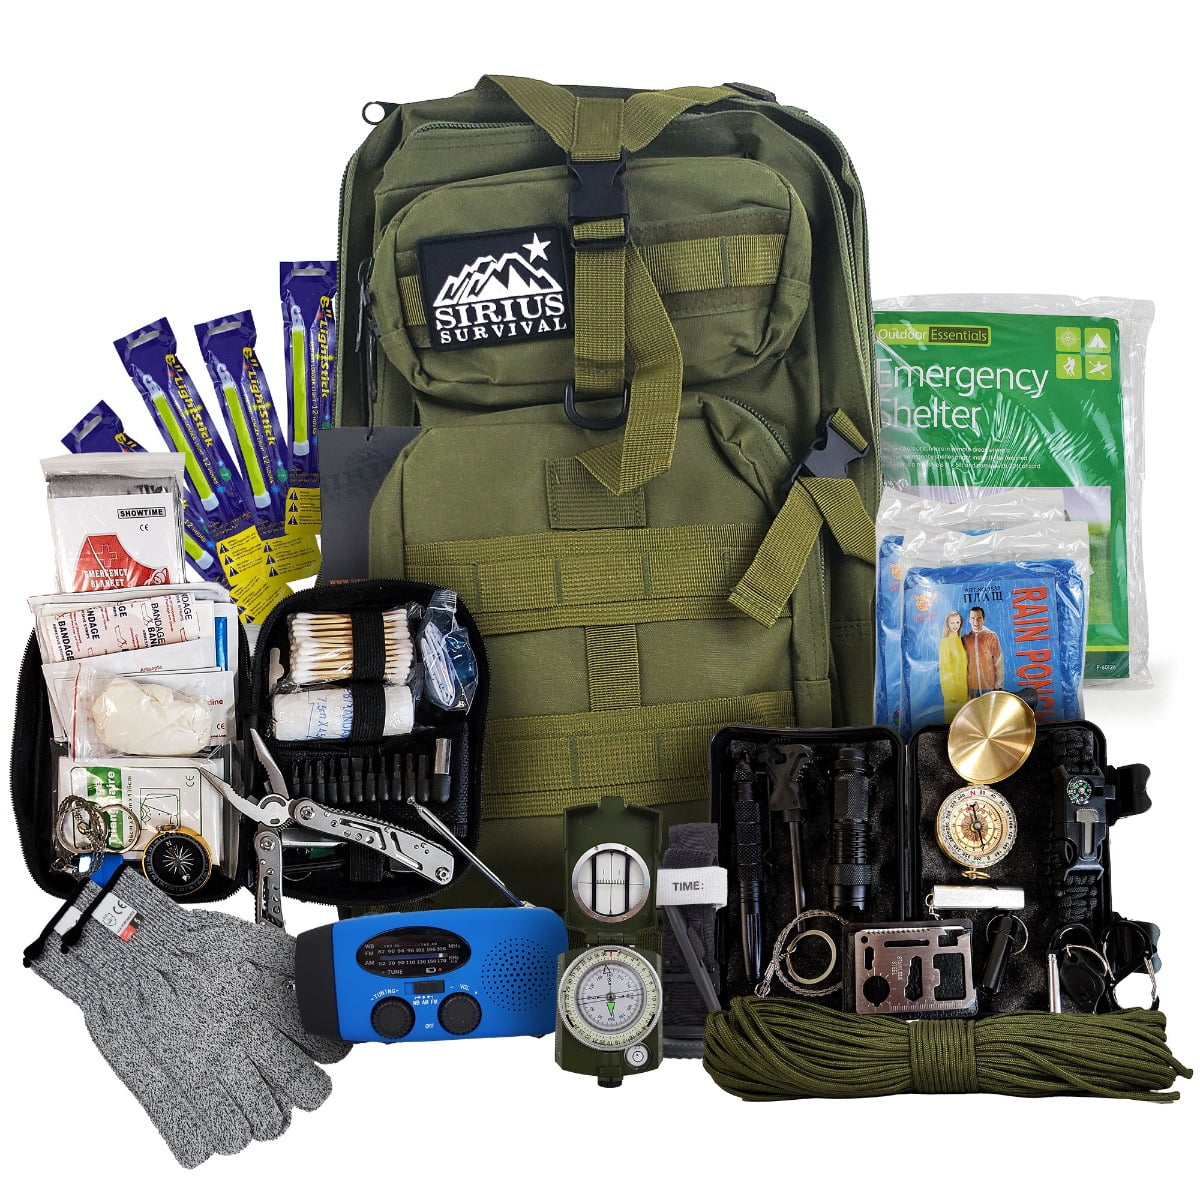 Tic Tac pocket survival kit - what would you include? - Backpacking Light